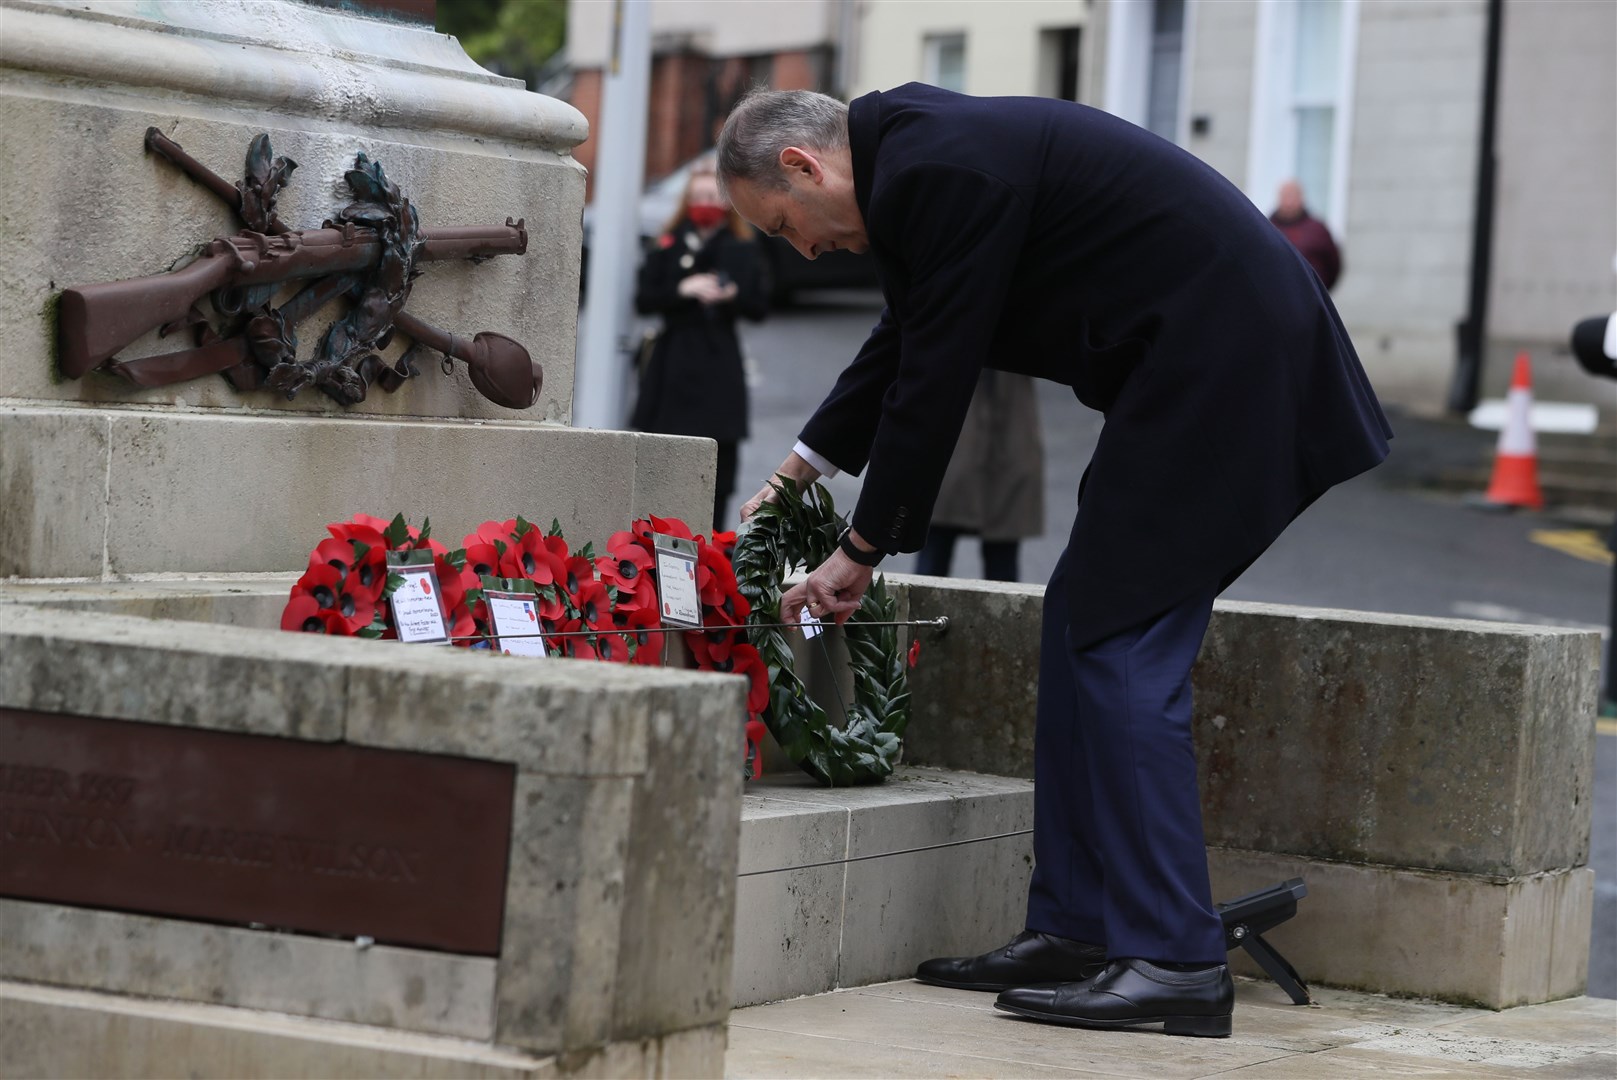 Irish Taoiseach Micheal Martin lays a wreath during the Remembrance Sunday service at the Cenotaph in Enniskillen (Brian Lawless/PA)